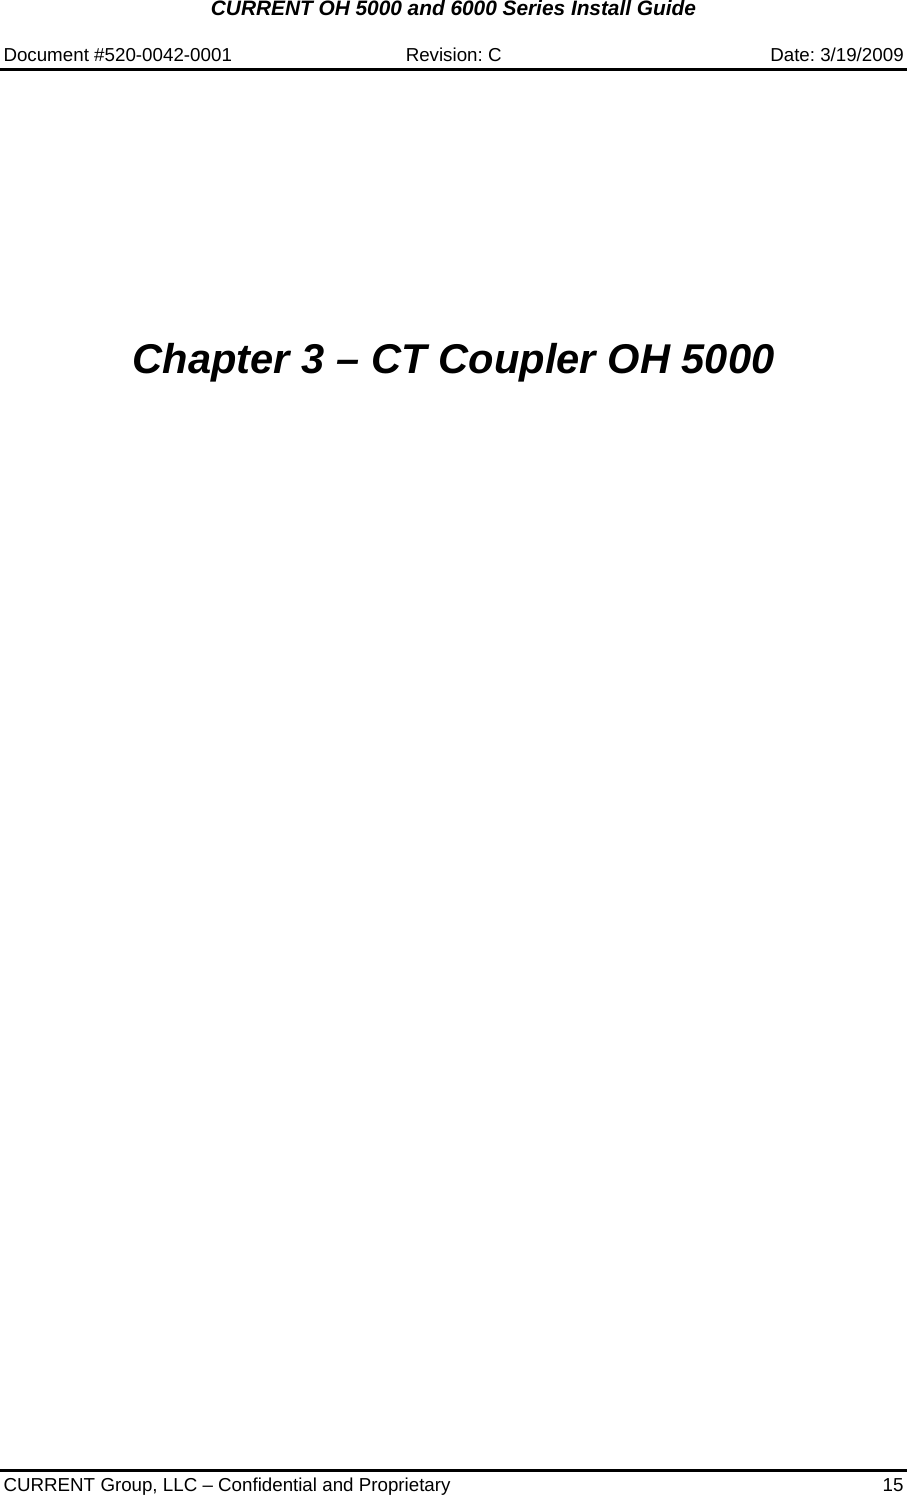 CURRENT OH 5000 and 6000 Series Install Guide  Document #520-0042-0001  Revision: C  Date: 3/19/2009  CURRENT Group, LLC – Confidential and Proprietary  15           Chapter 3 – CT Coupler OH 5000     